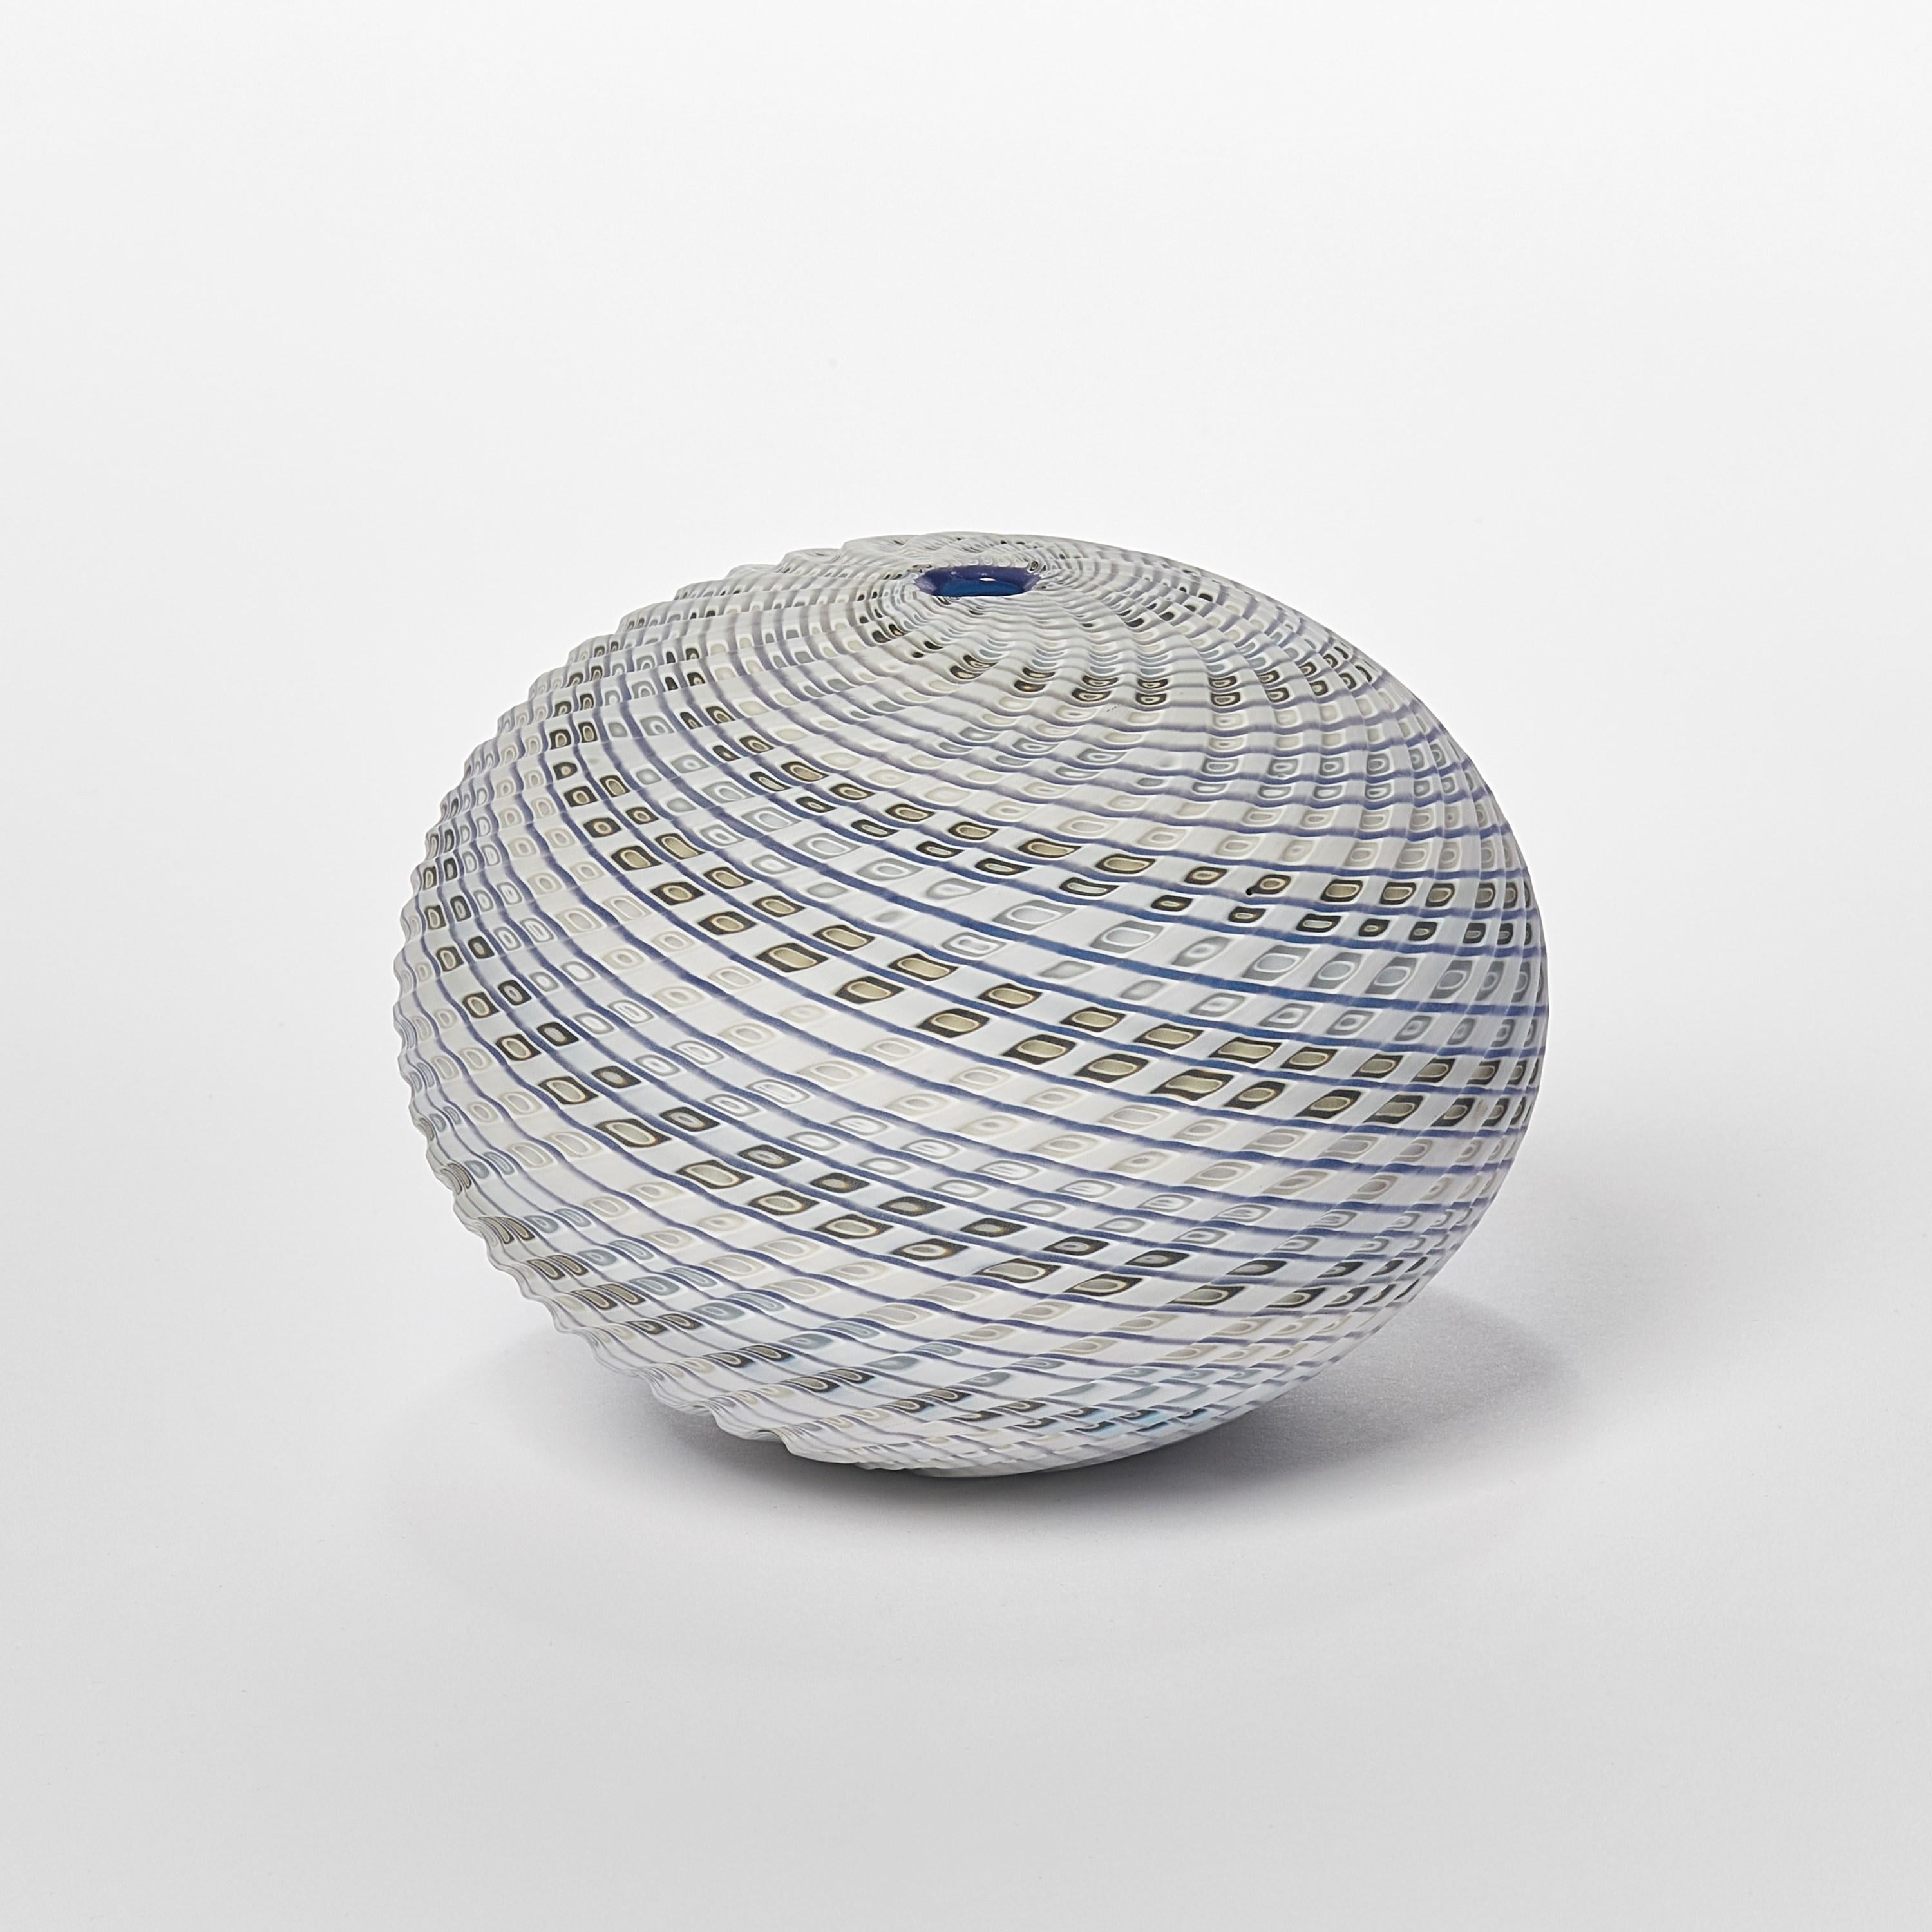 'Woven Three Tone Blue Round' is a unique handblown, sculpted and cut glass sculpture by the British artist, Layne Rowe.

Rowe’s inspiration is drawn from the dramatic Devon coastline which informs his love for detail, a constant theme for his